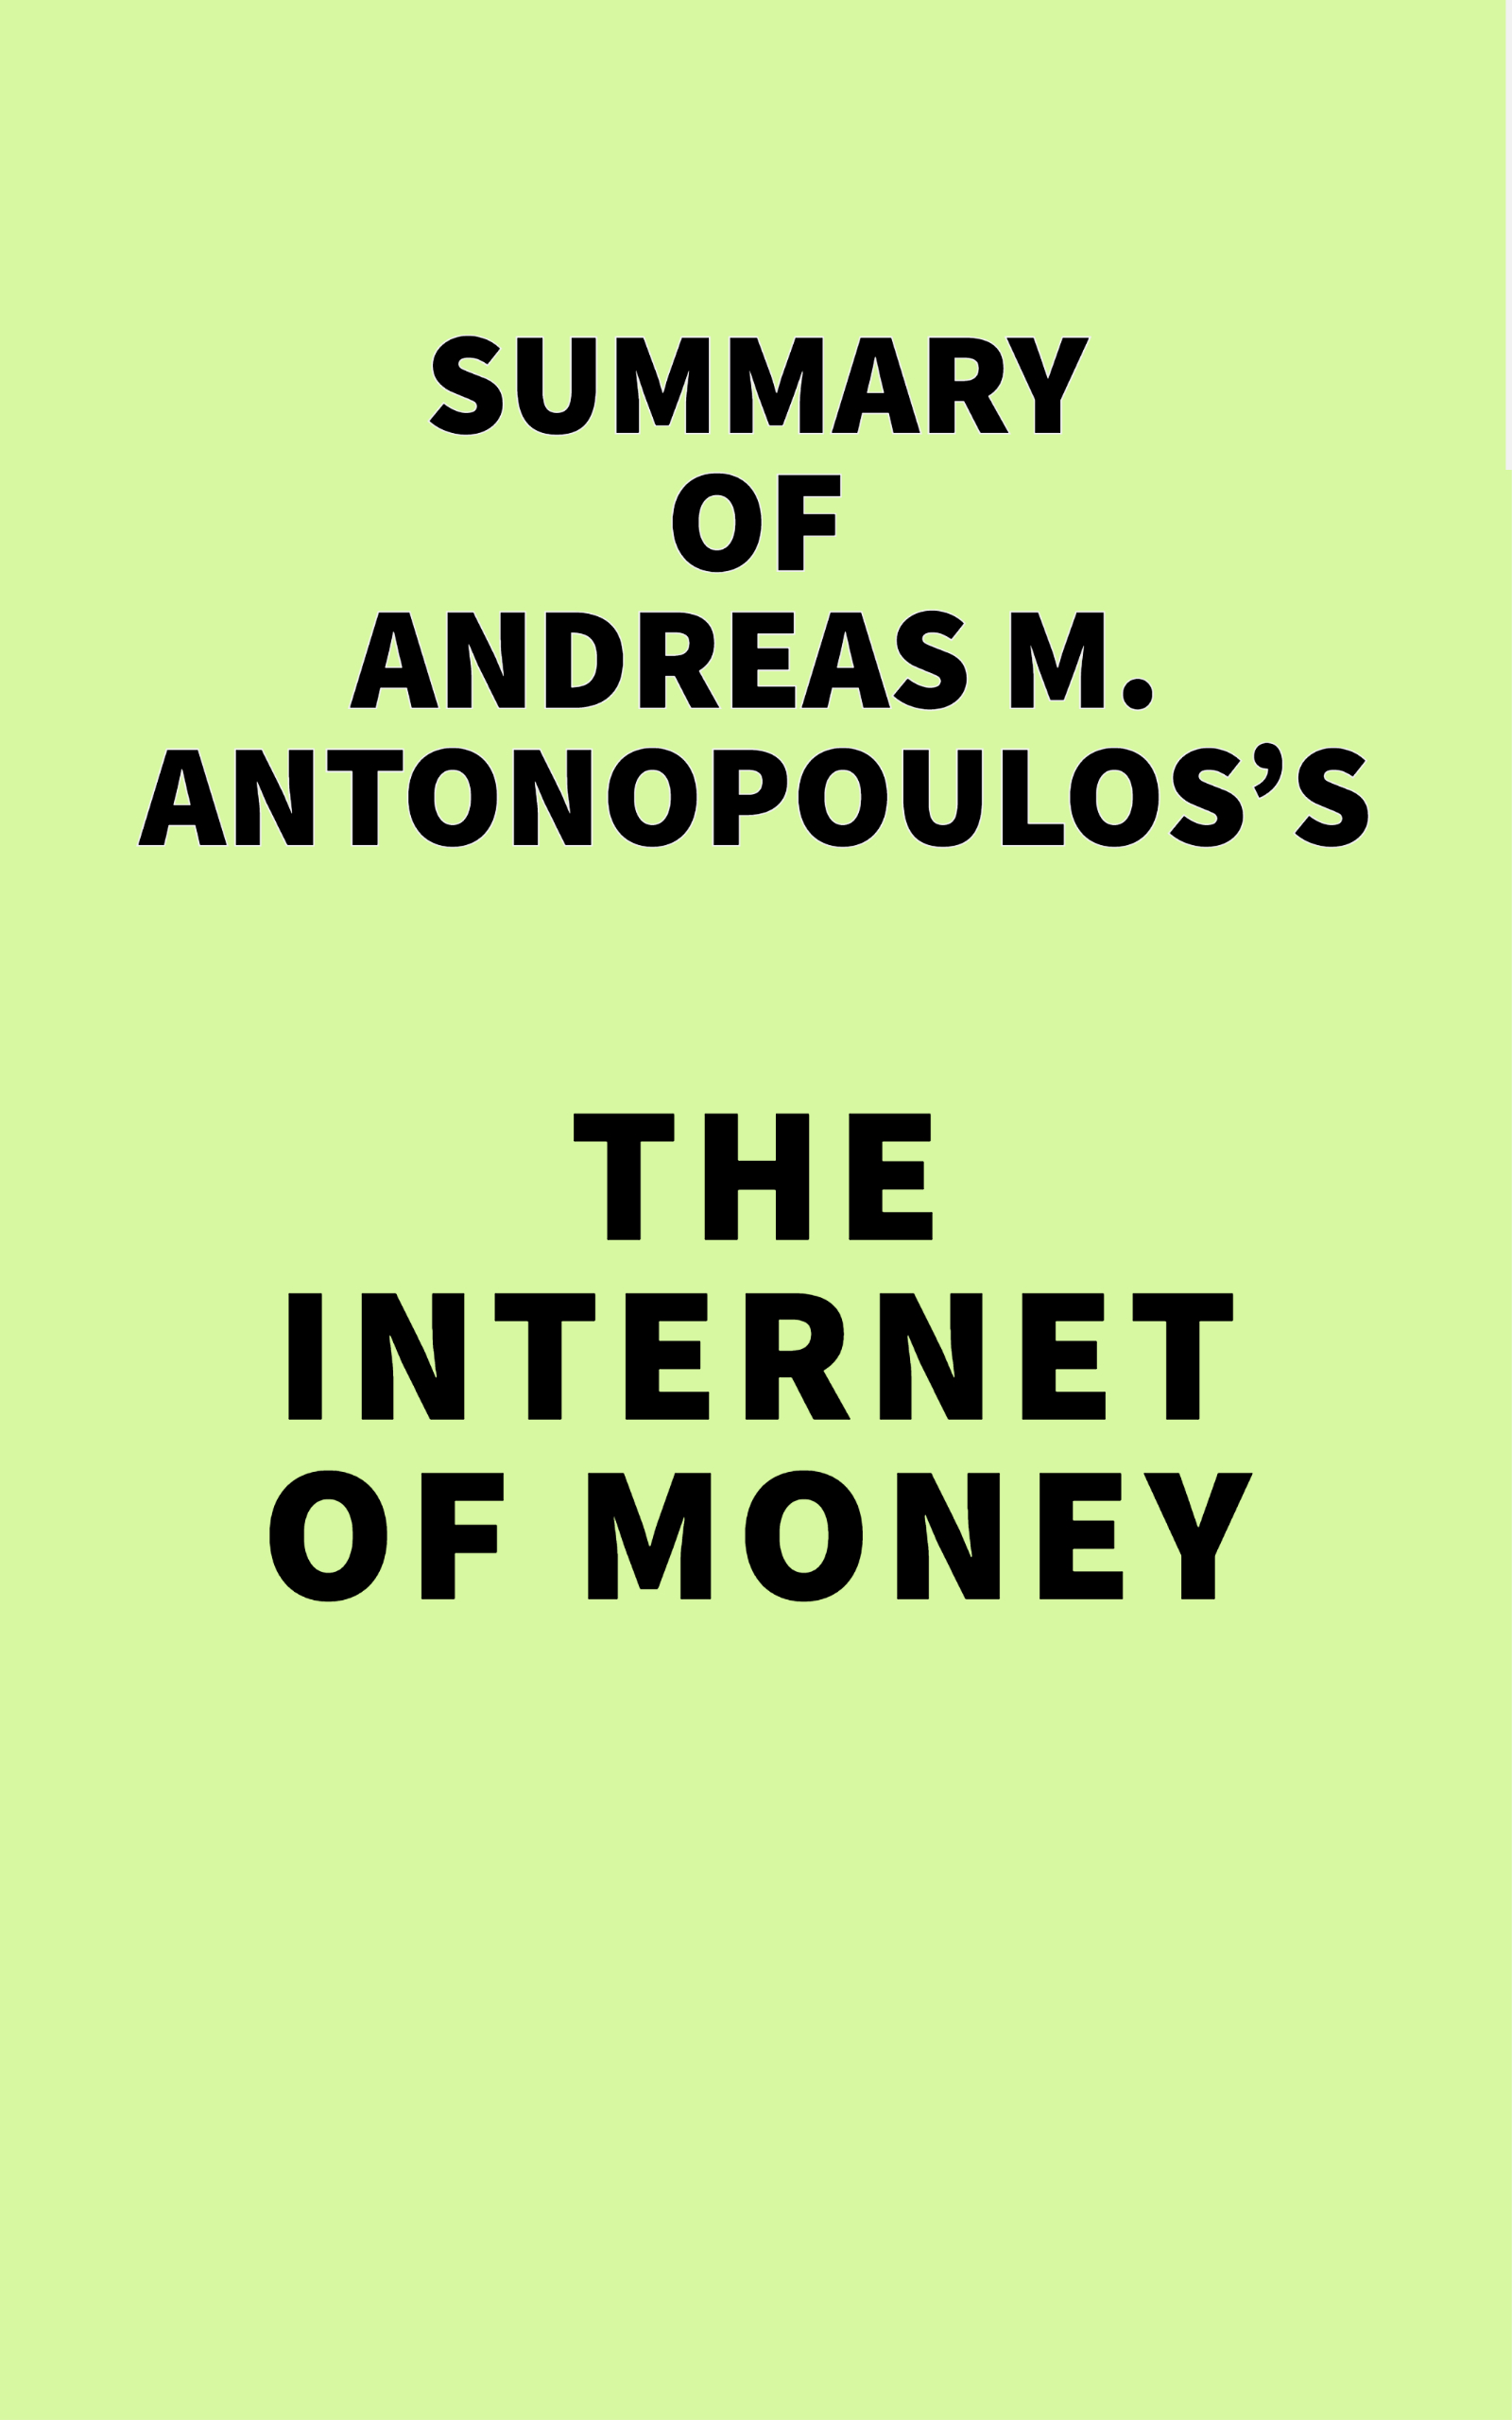 Summary of Andreas M. Antonopoulos's The Internet of Money